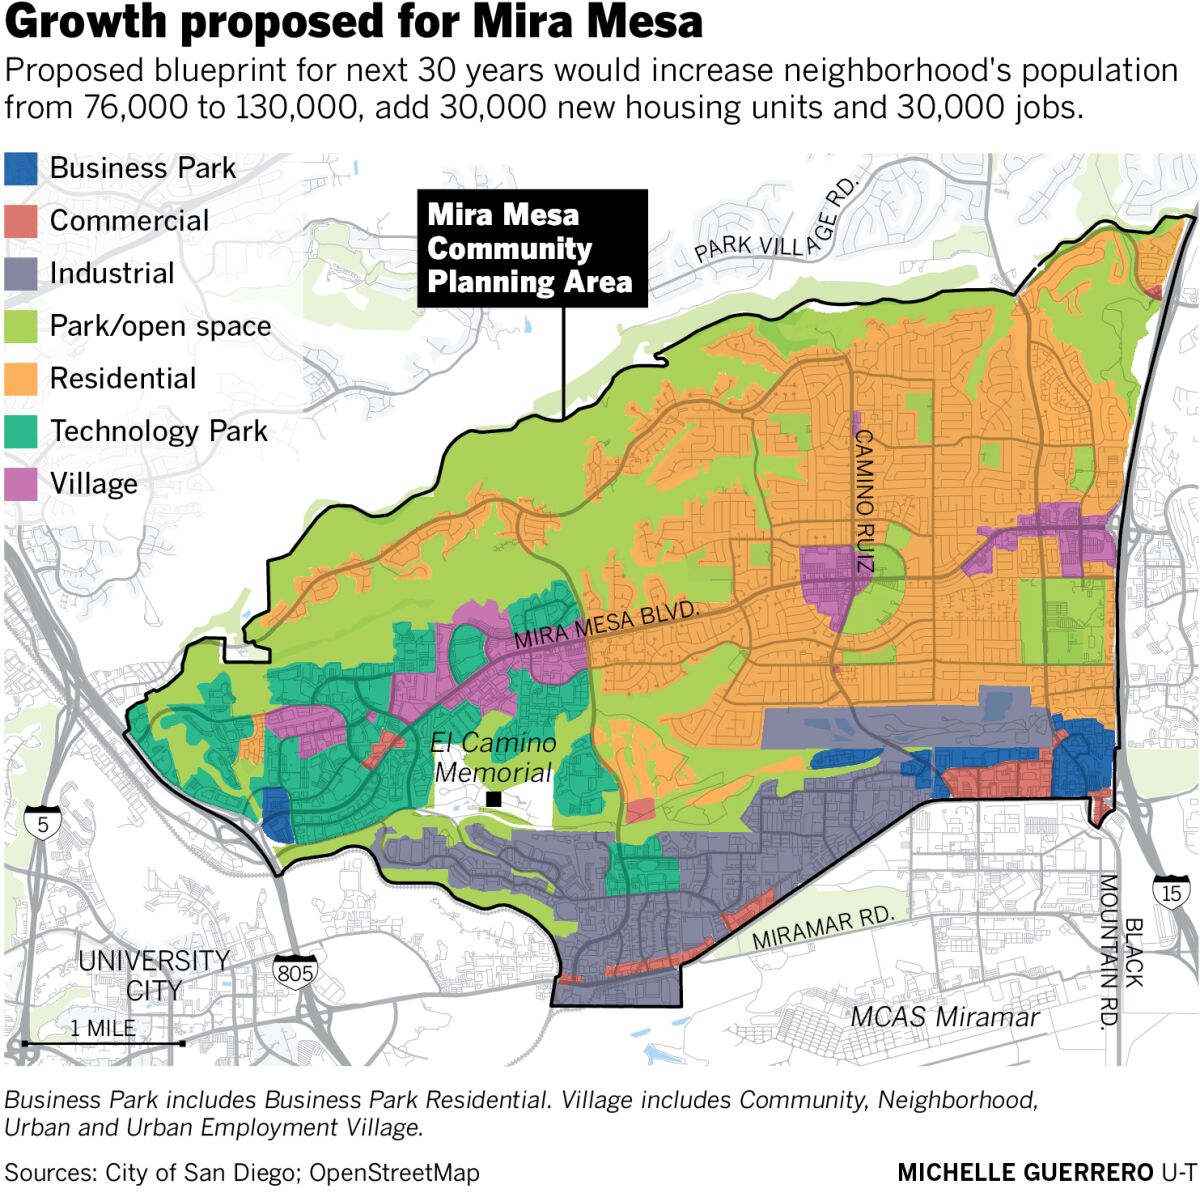 Growth proposed for Mira Mesa